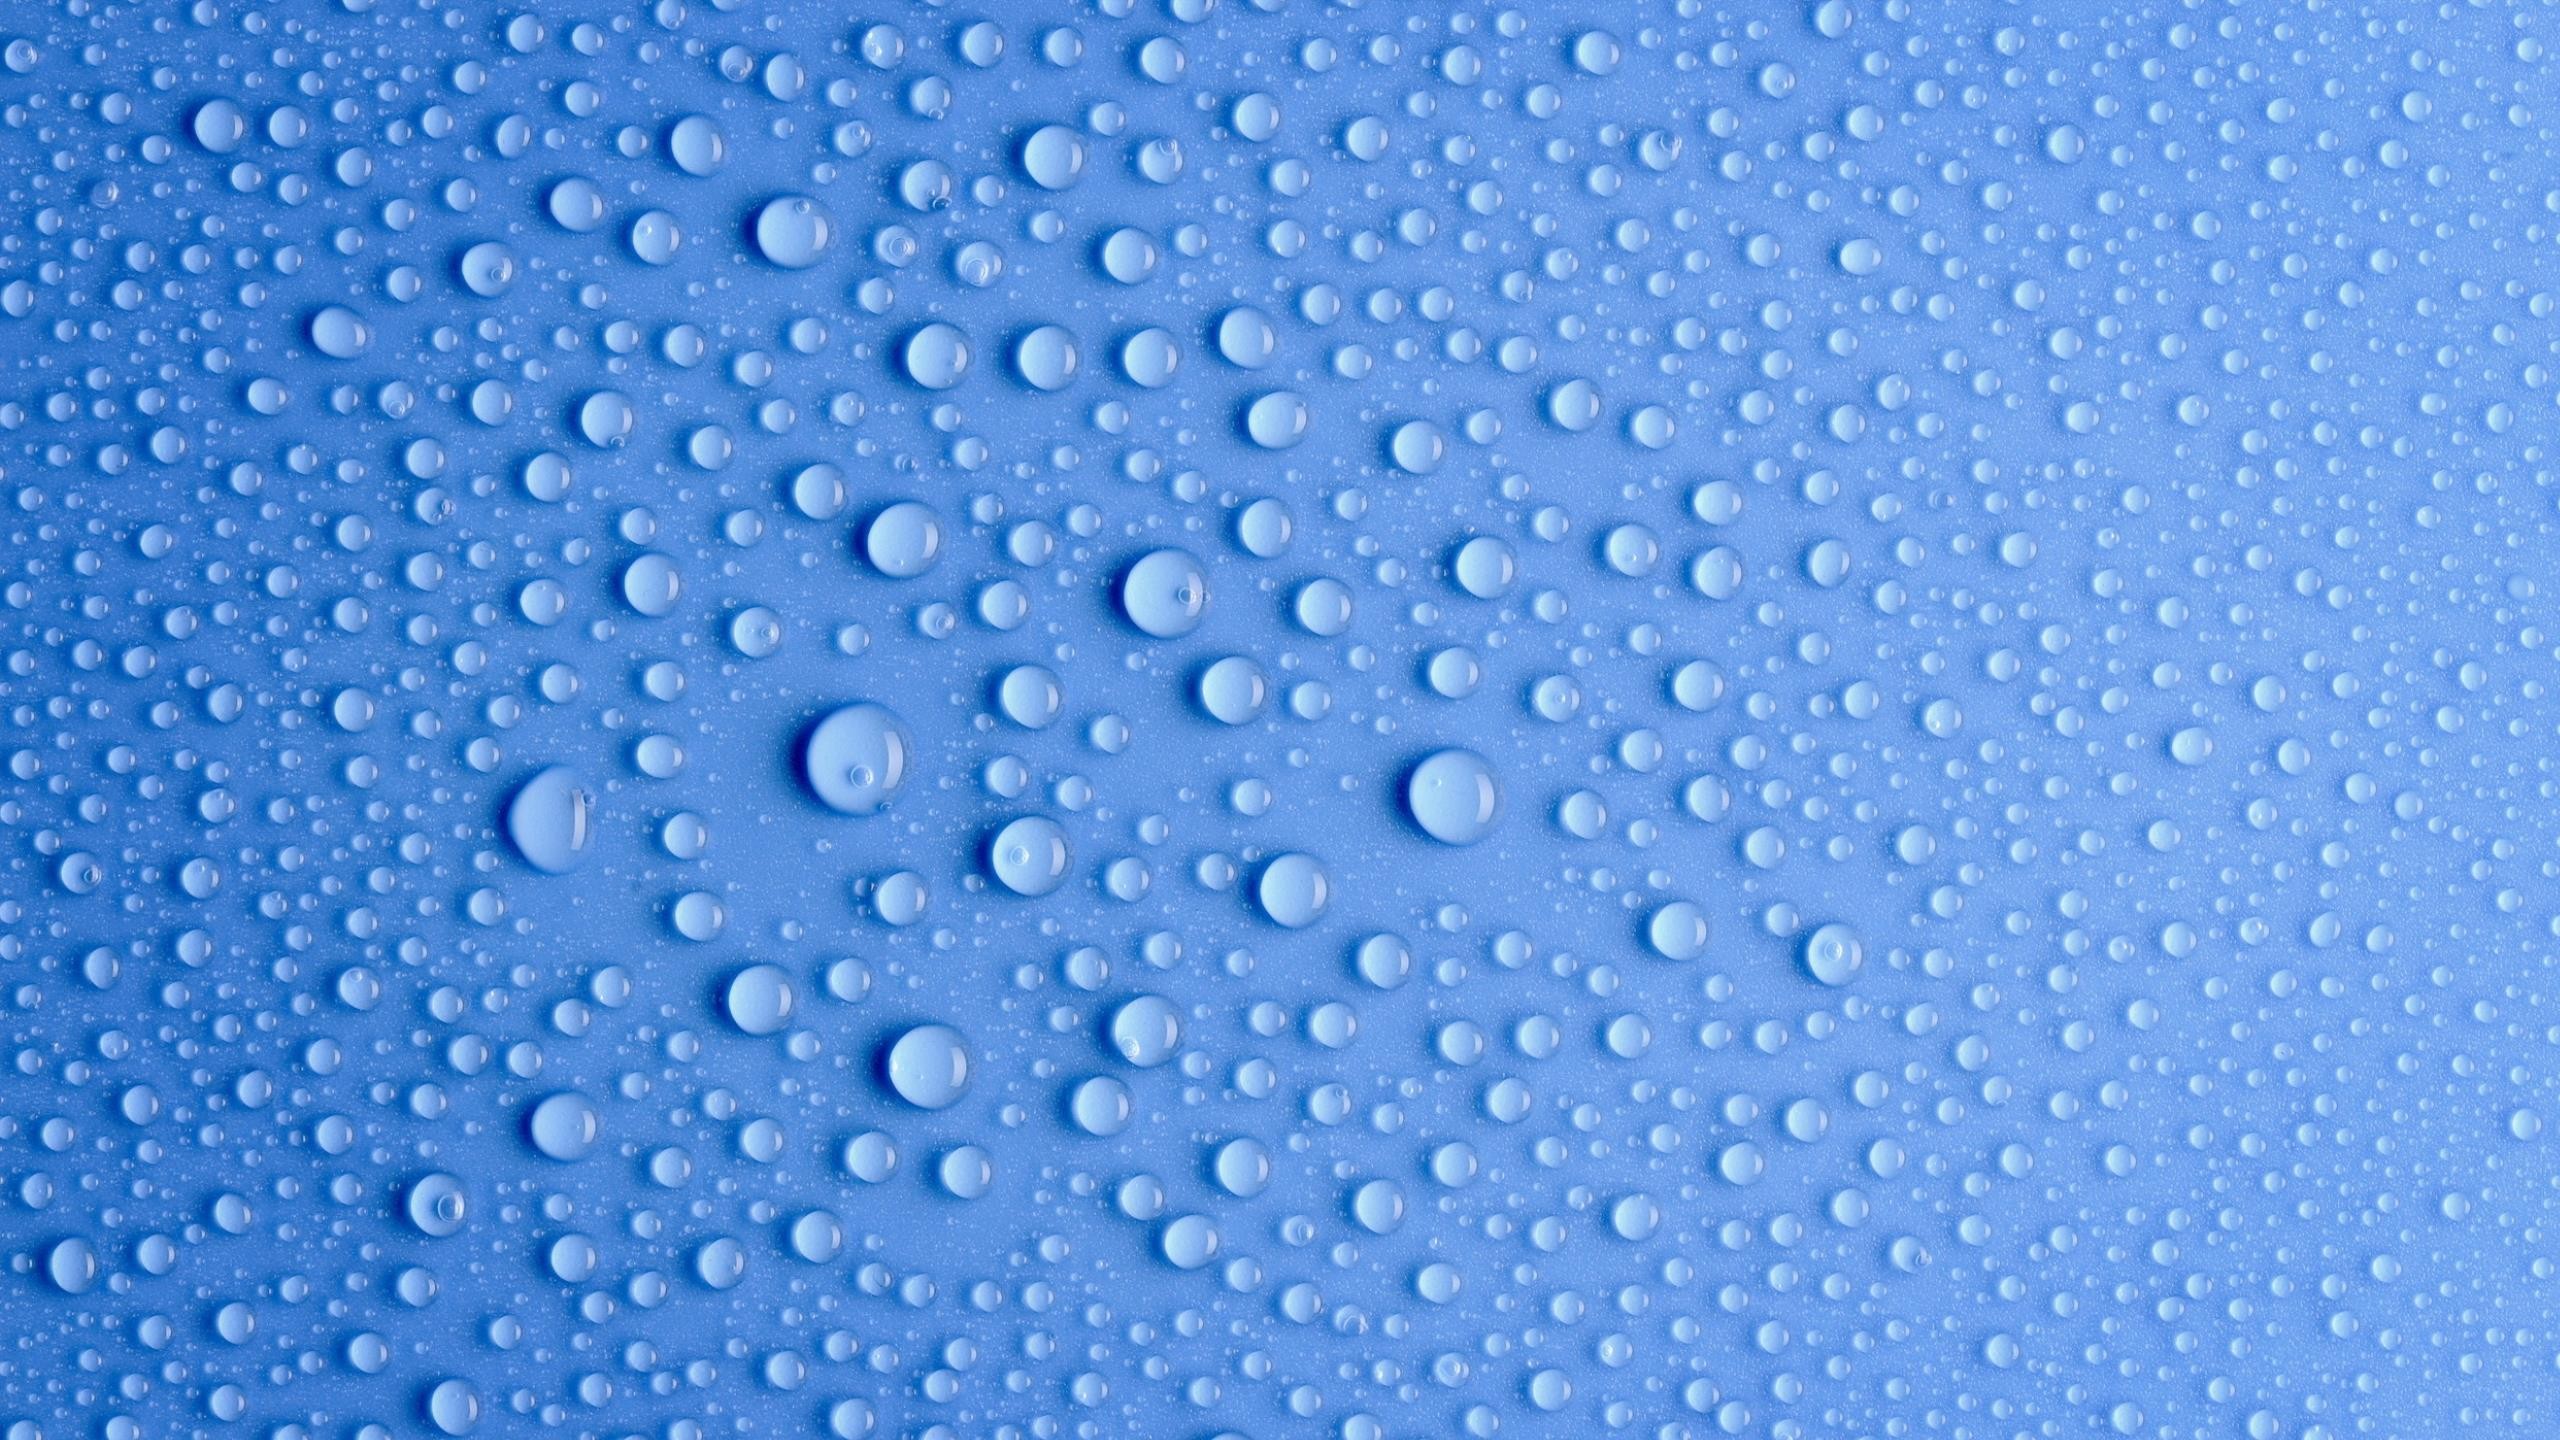 General 2560x1440 water drops blue background texture closeup simple background